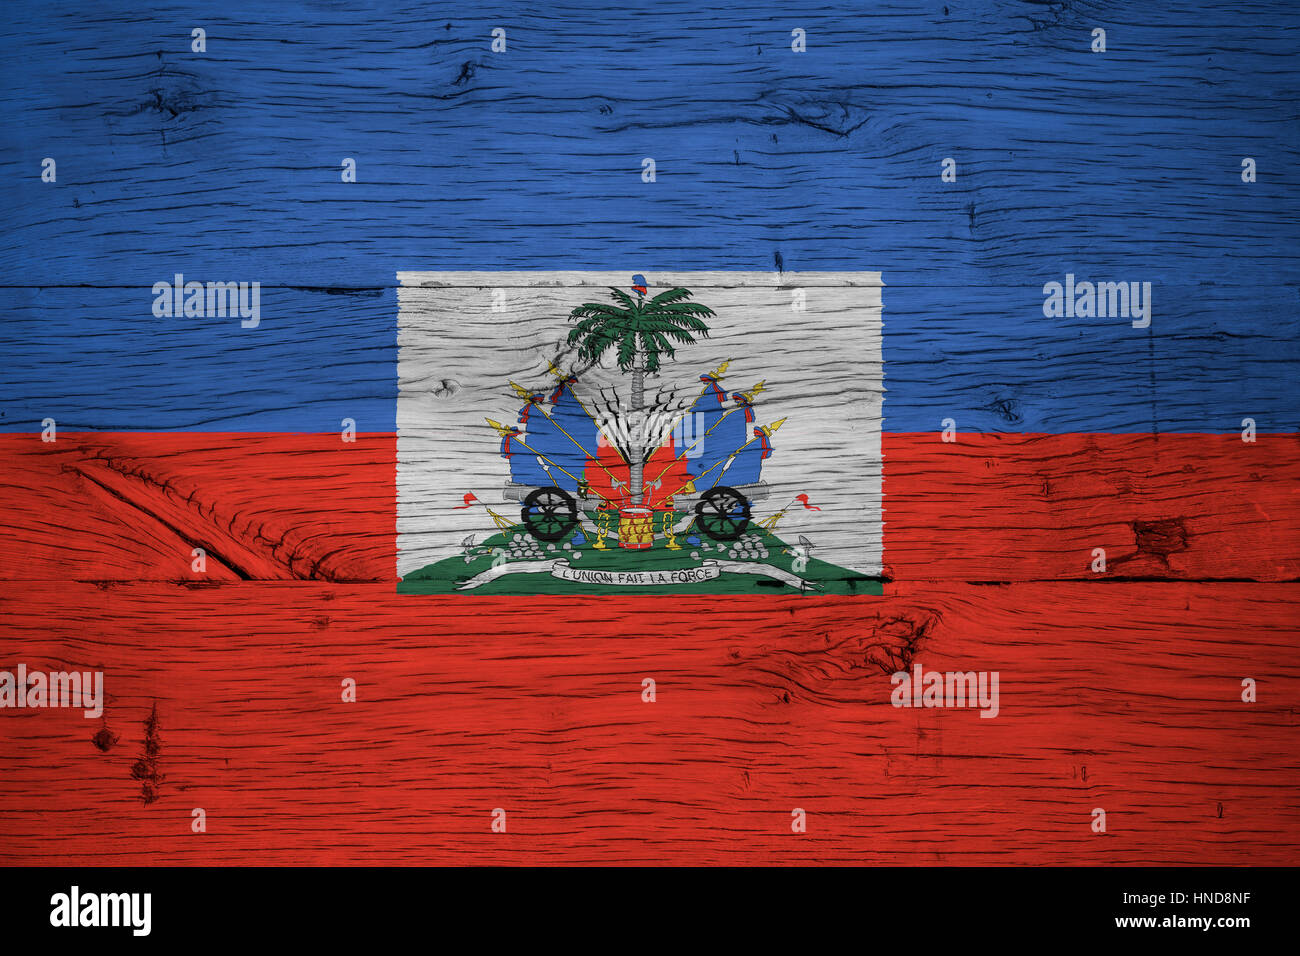 Haiti national flag with coat of arms painted on old oak wood. Painting is colorful on planks of old train carriage. Stock Photo